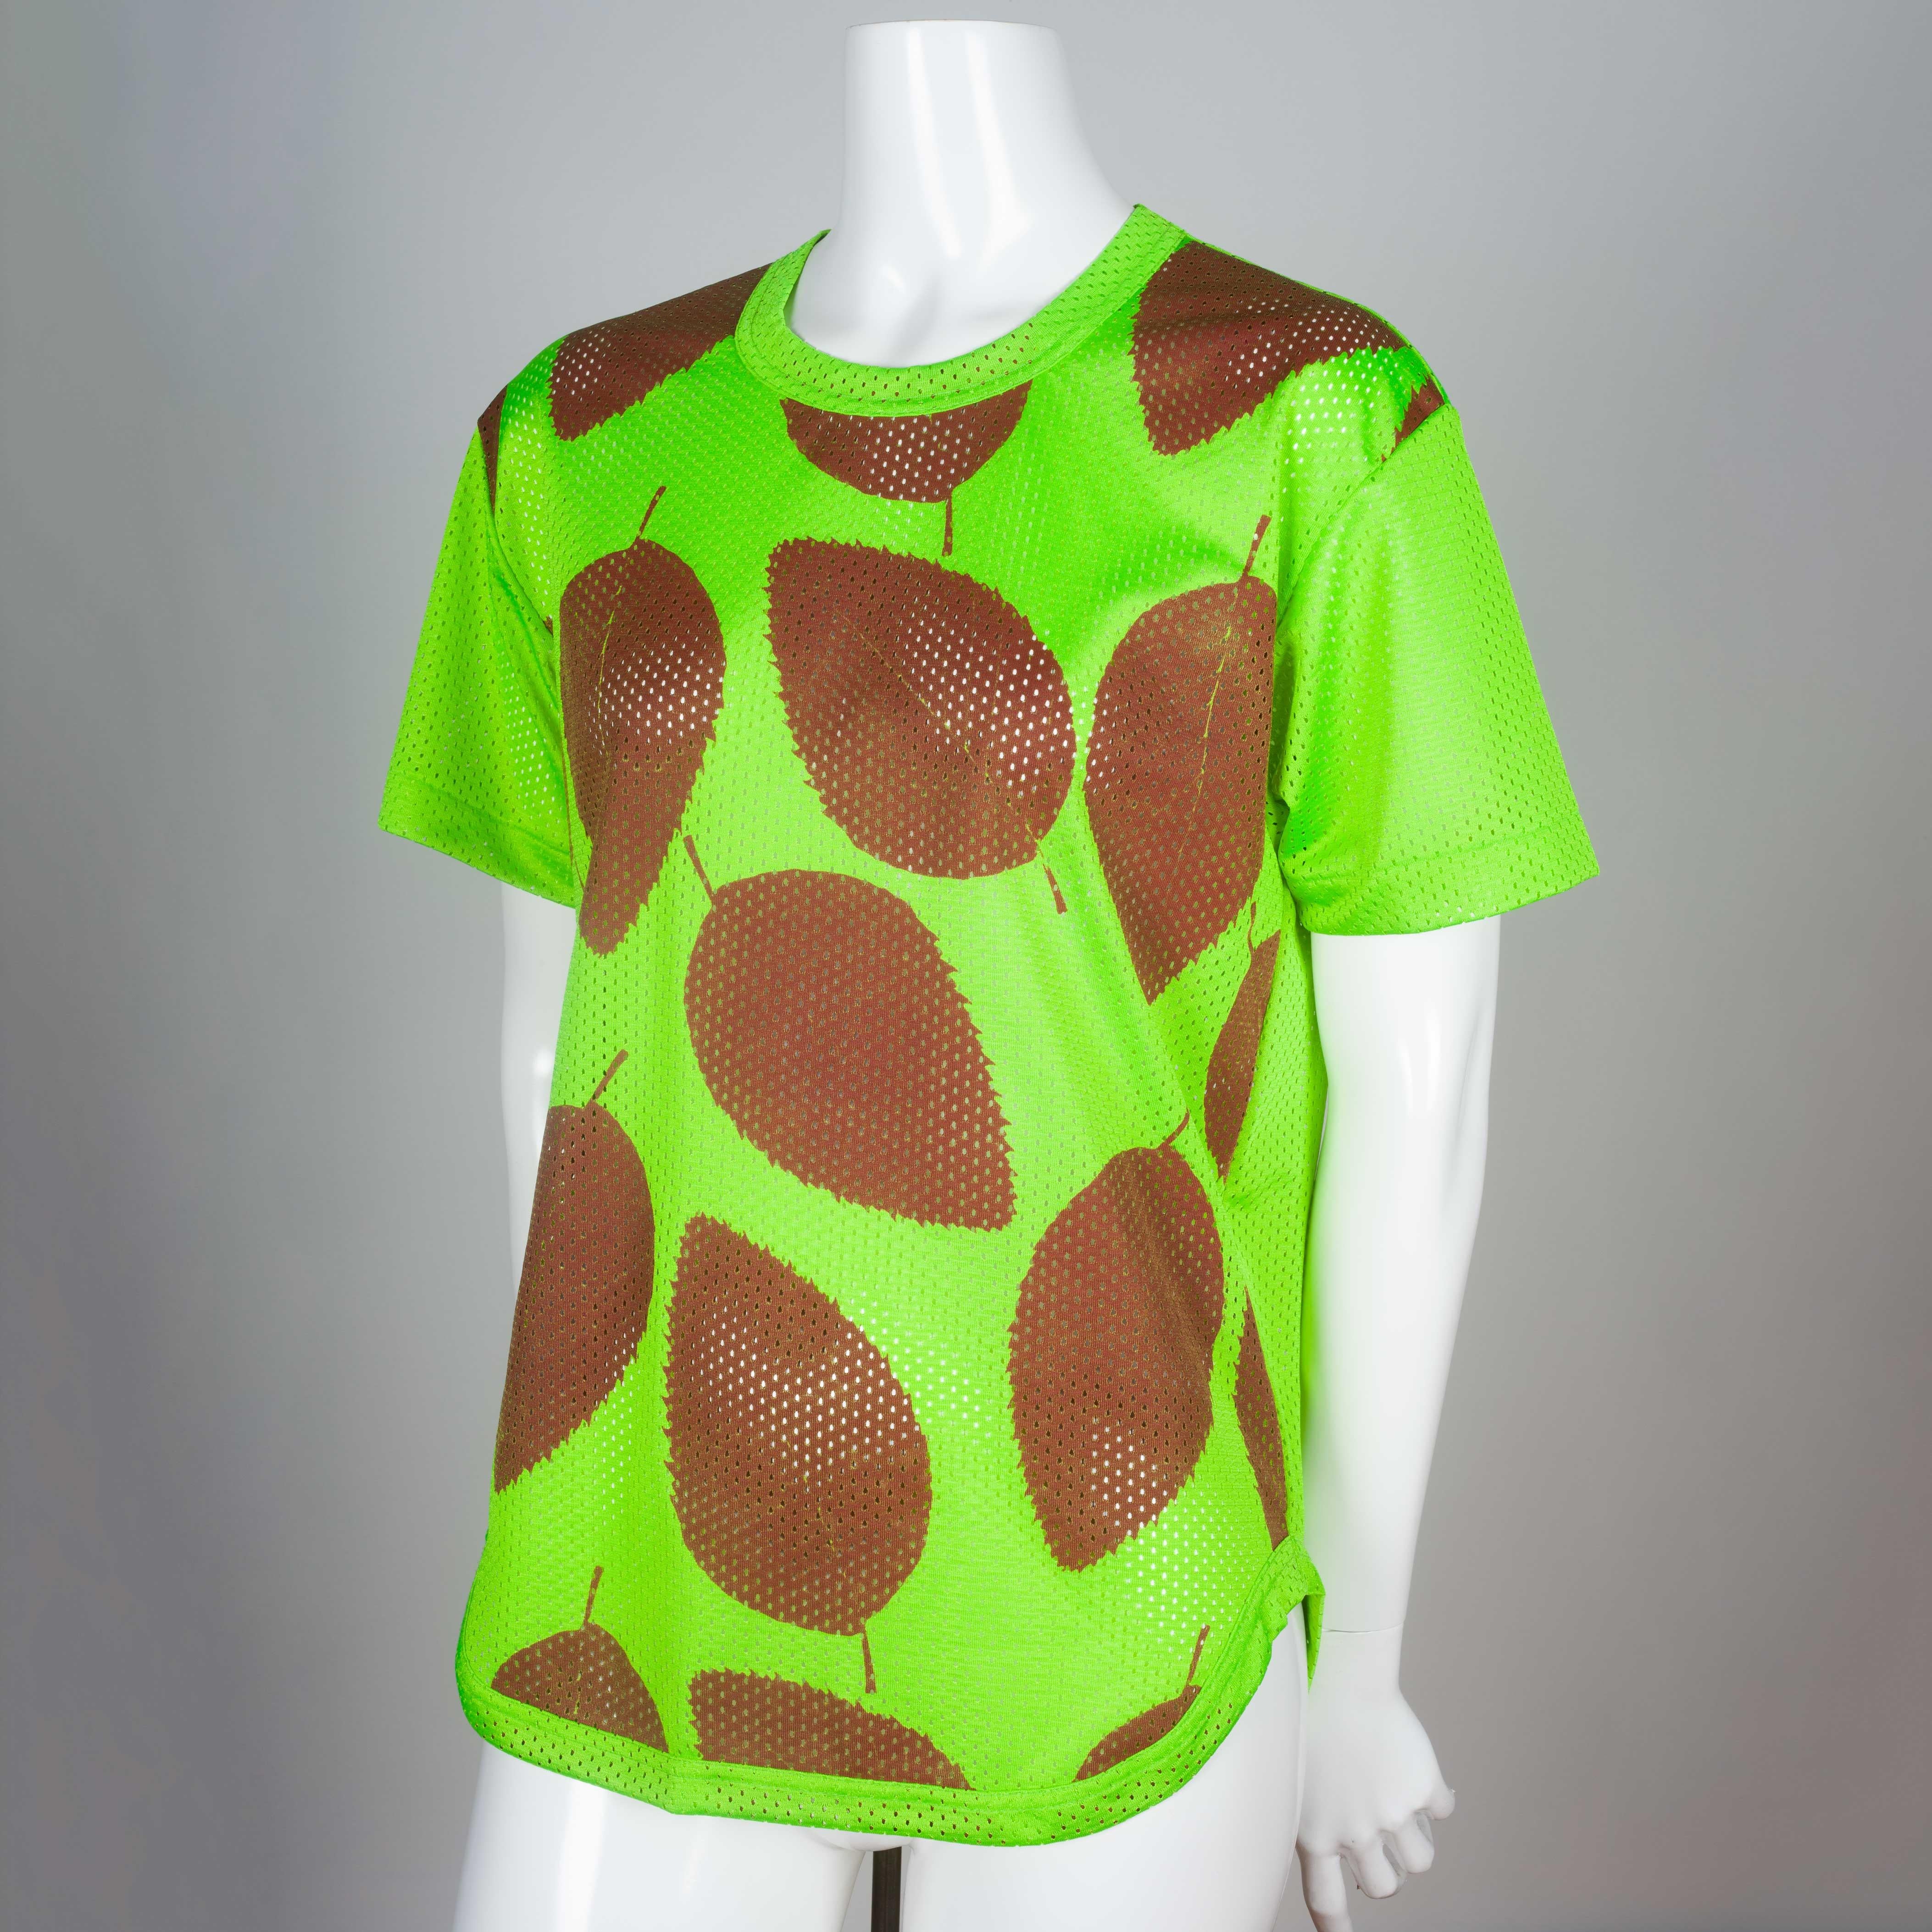 Comme des Garçons Homme Plus from 2000, a neon green textured mesh t-shirt from Japan with deep brown sienna screen-printed leaves. The contrast of material, theme and color is a perfect signature of Kawakubo magic in everyday clothing. Think the